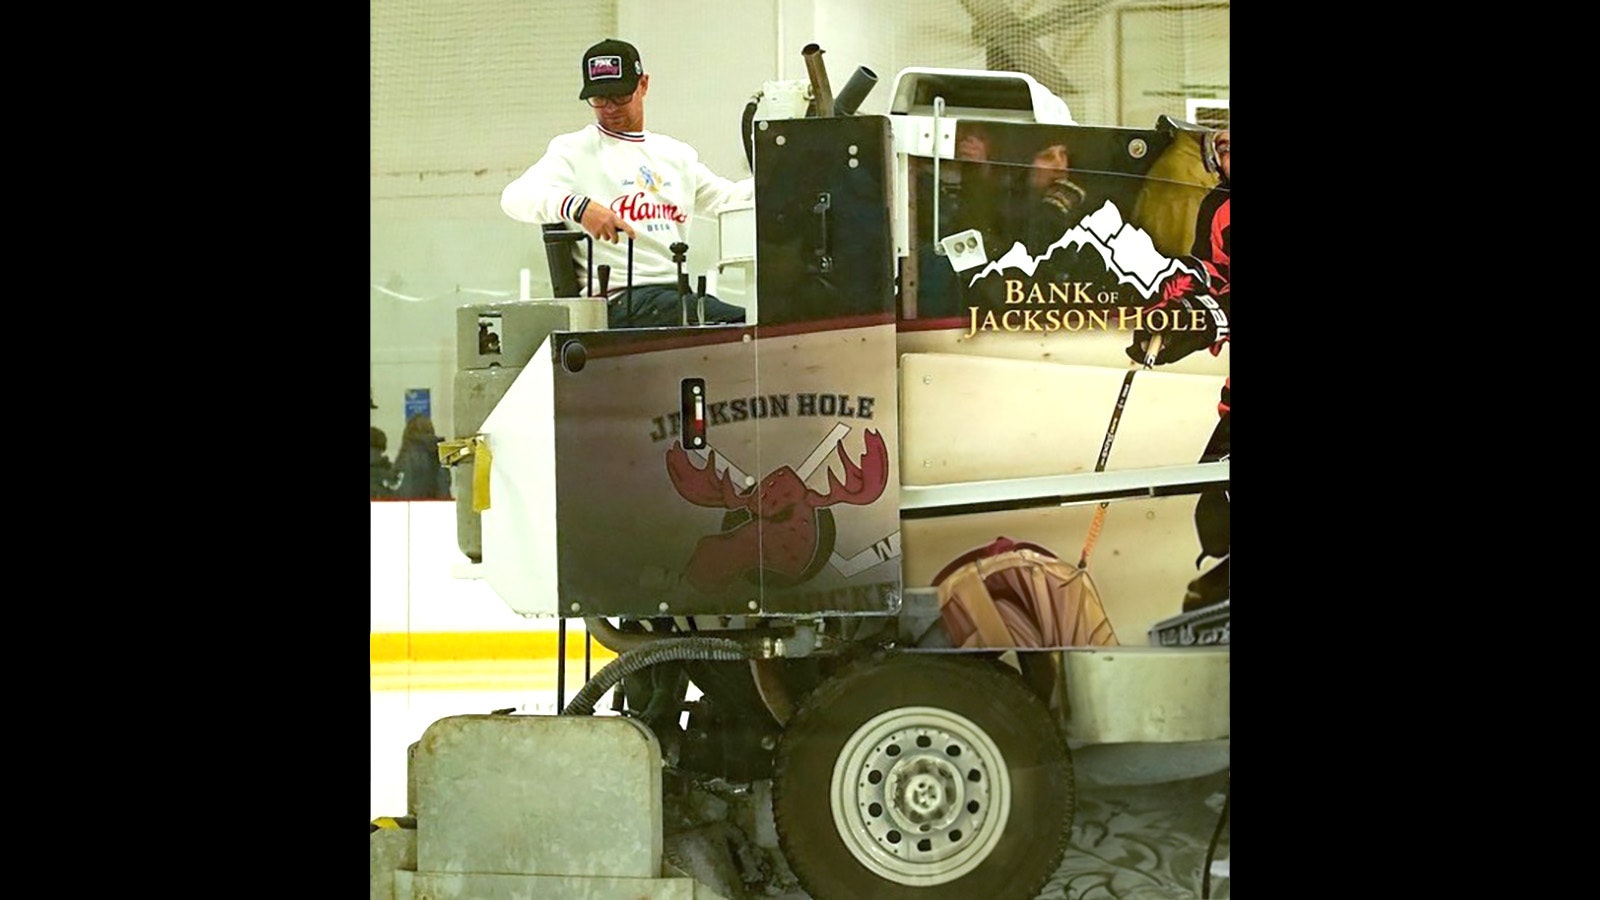 TJ Thomas runs the Zamboni over the ice at the Snow King Sports and Events Center in Jackson, Wyoming.